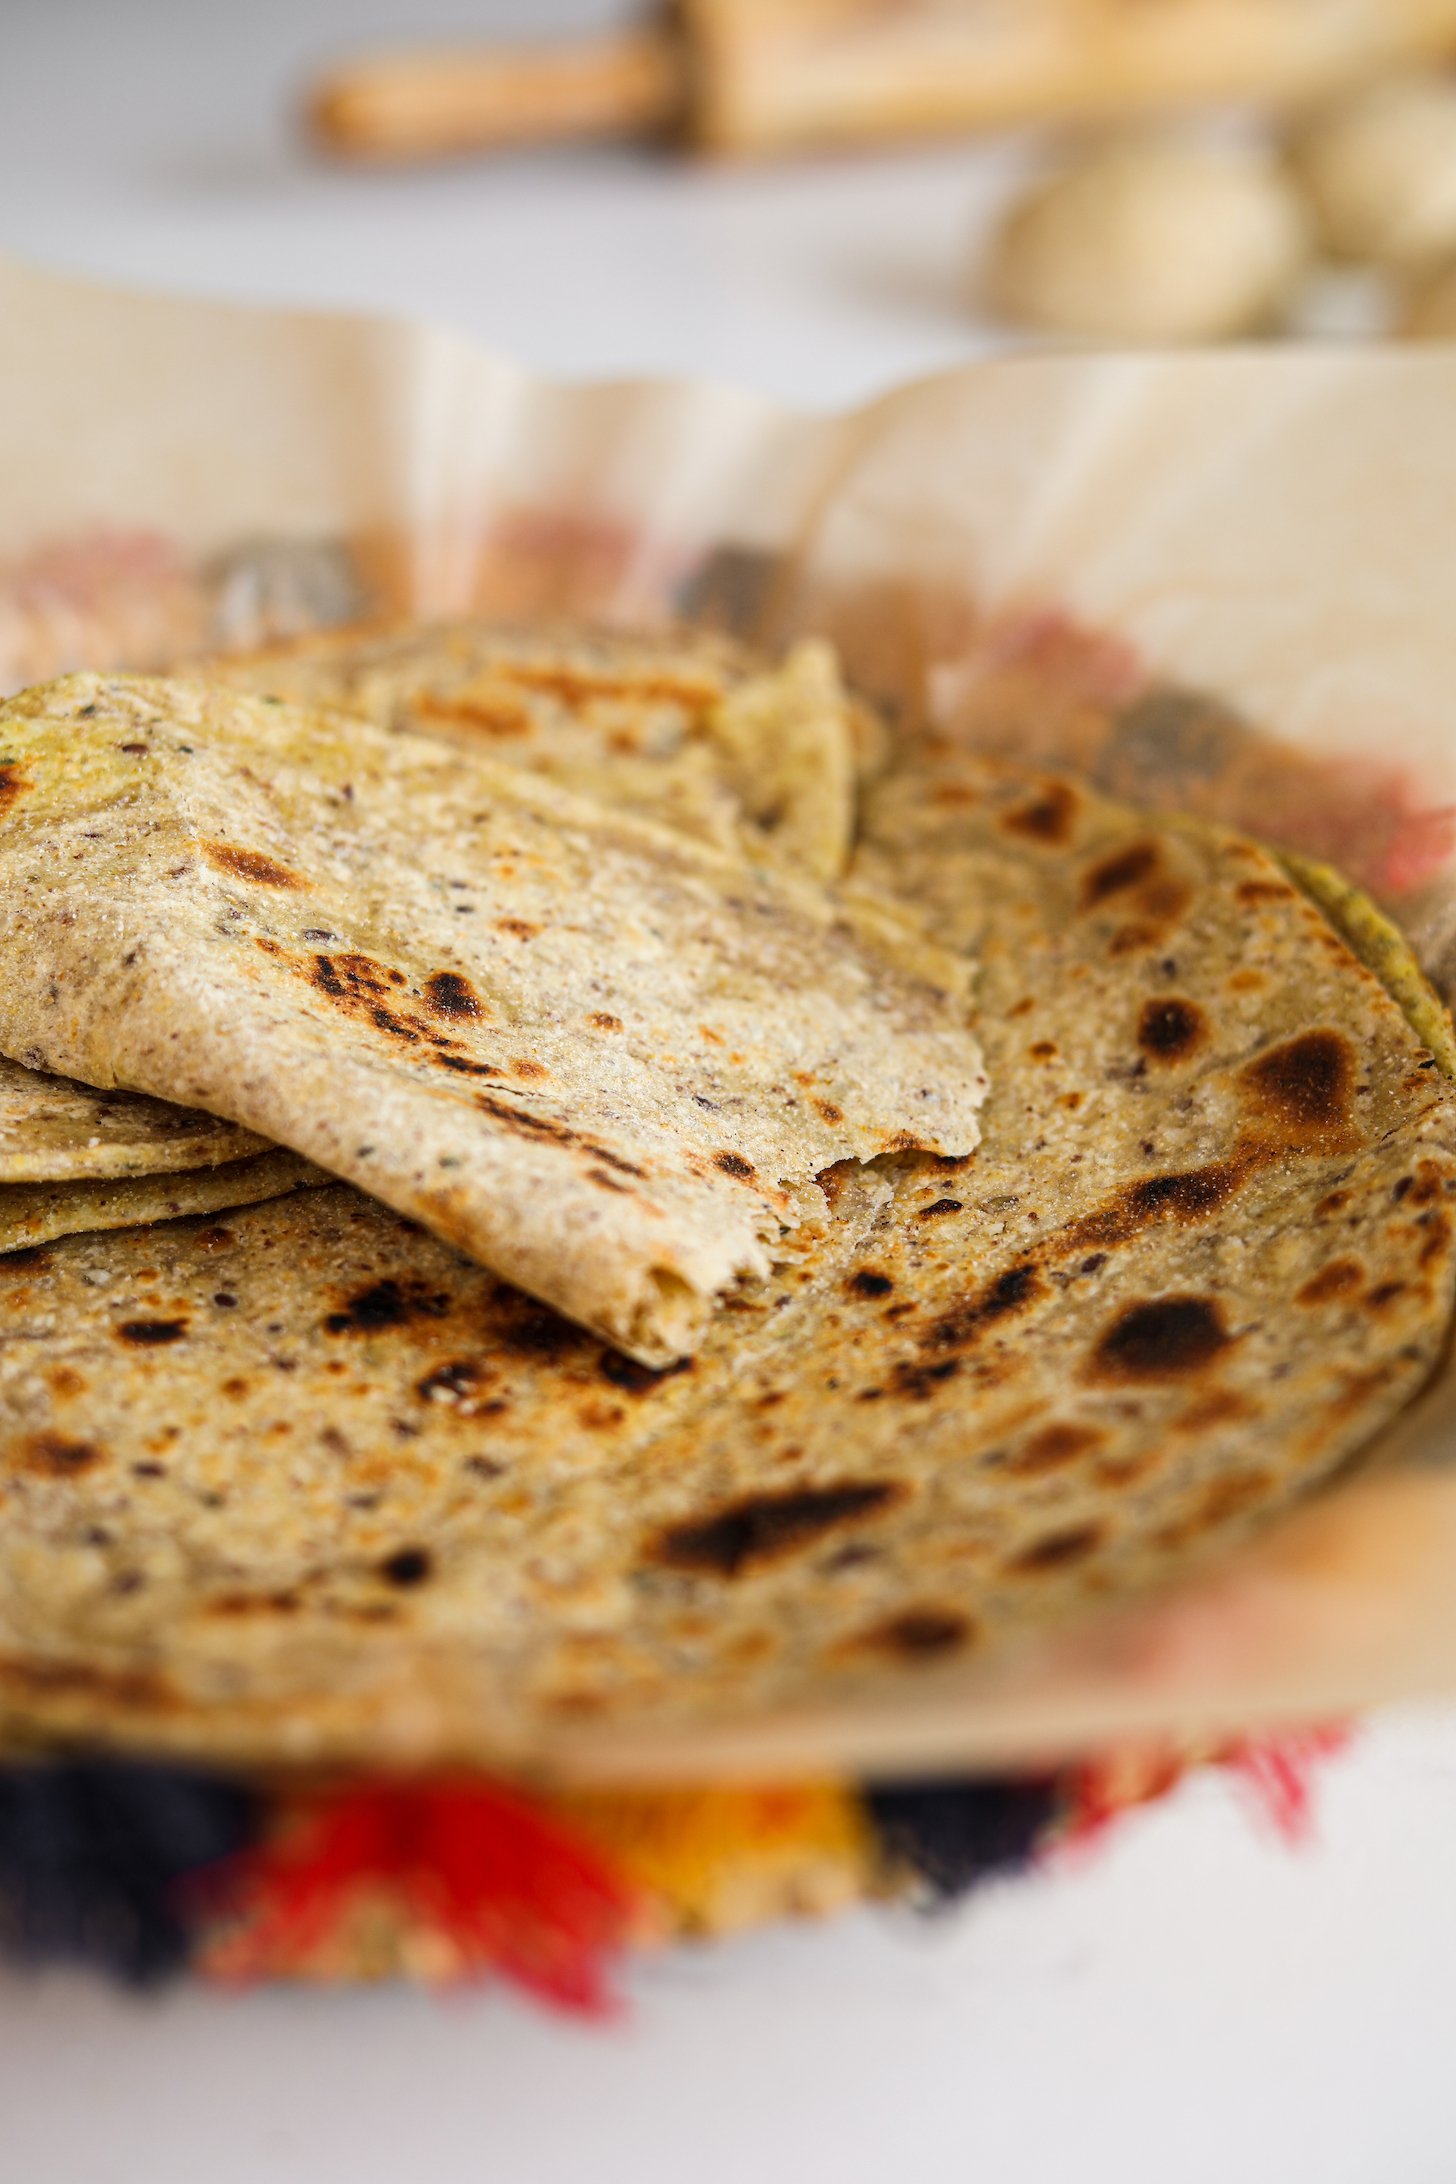 Close up of Indian flatbread (paratha) with one ripped in half and folded.